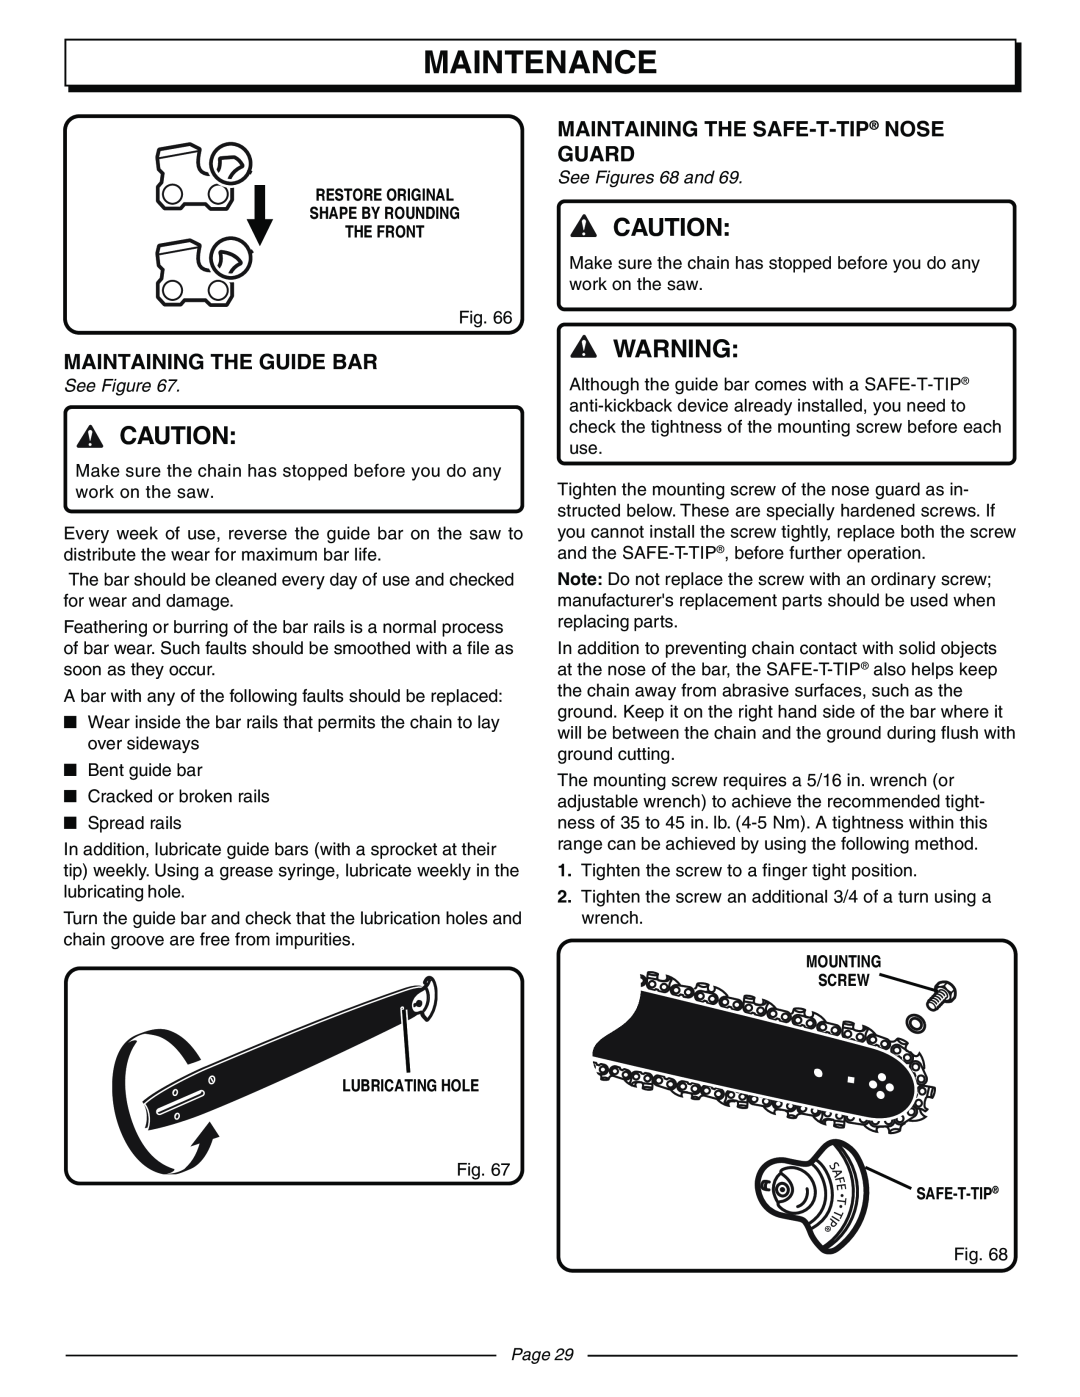 Homelite UT10942D manual Maintaining The Guide Bar, Maintaining The Safe-T-Tip Nose Guard, Maintenance, See Figure, Page 